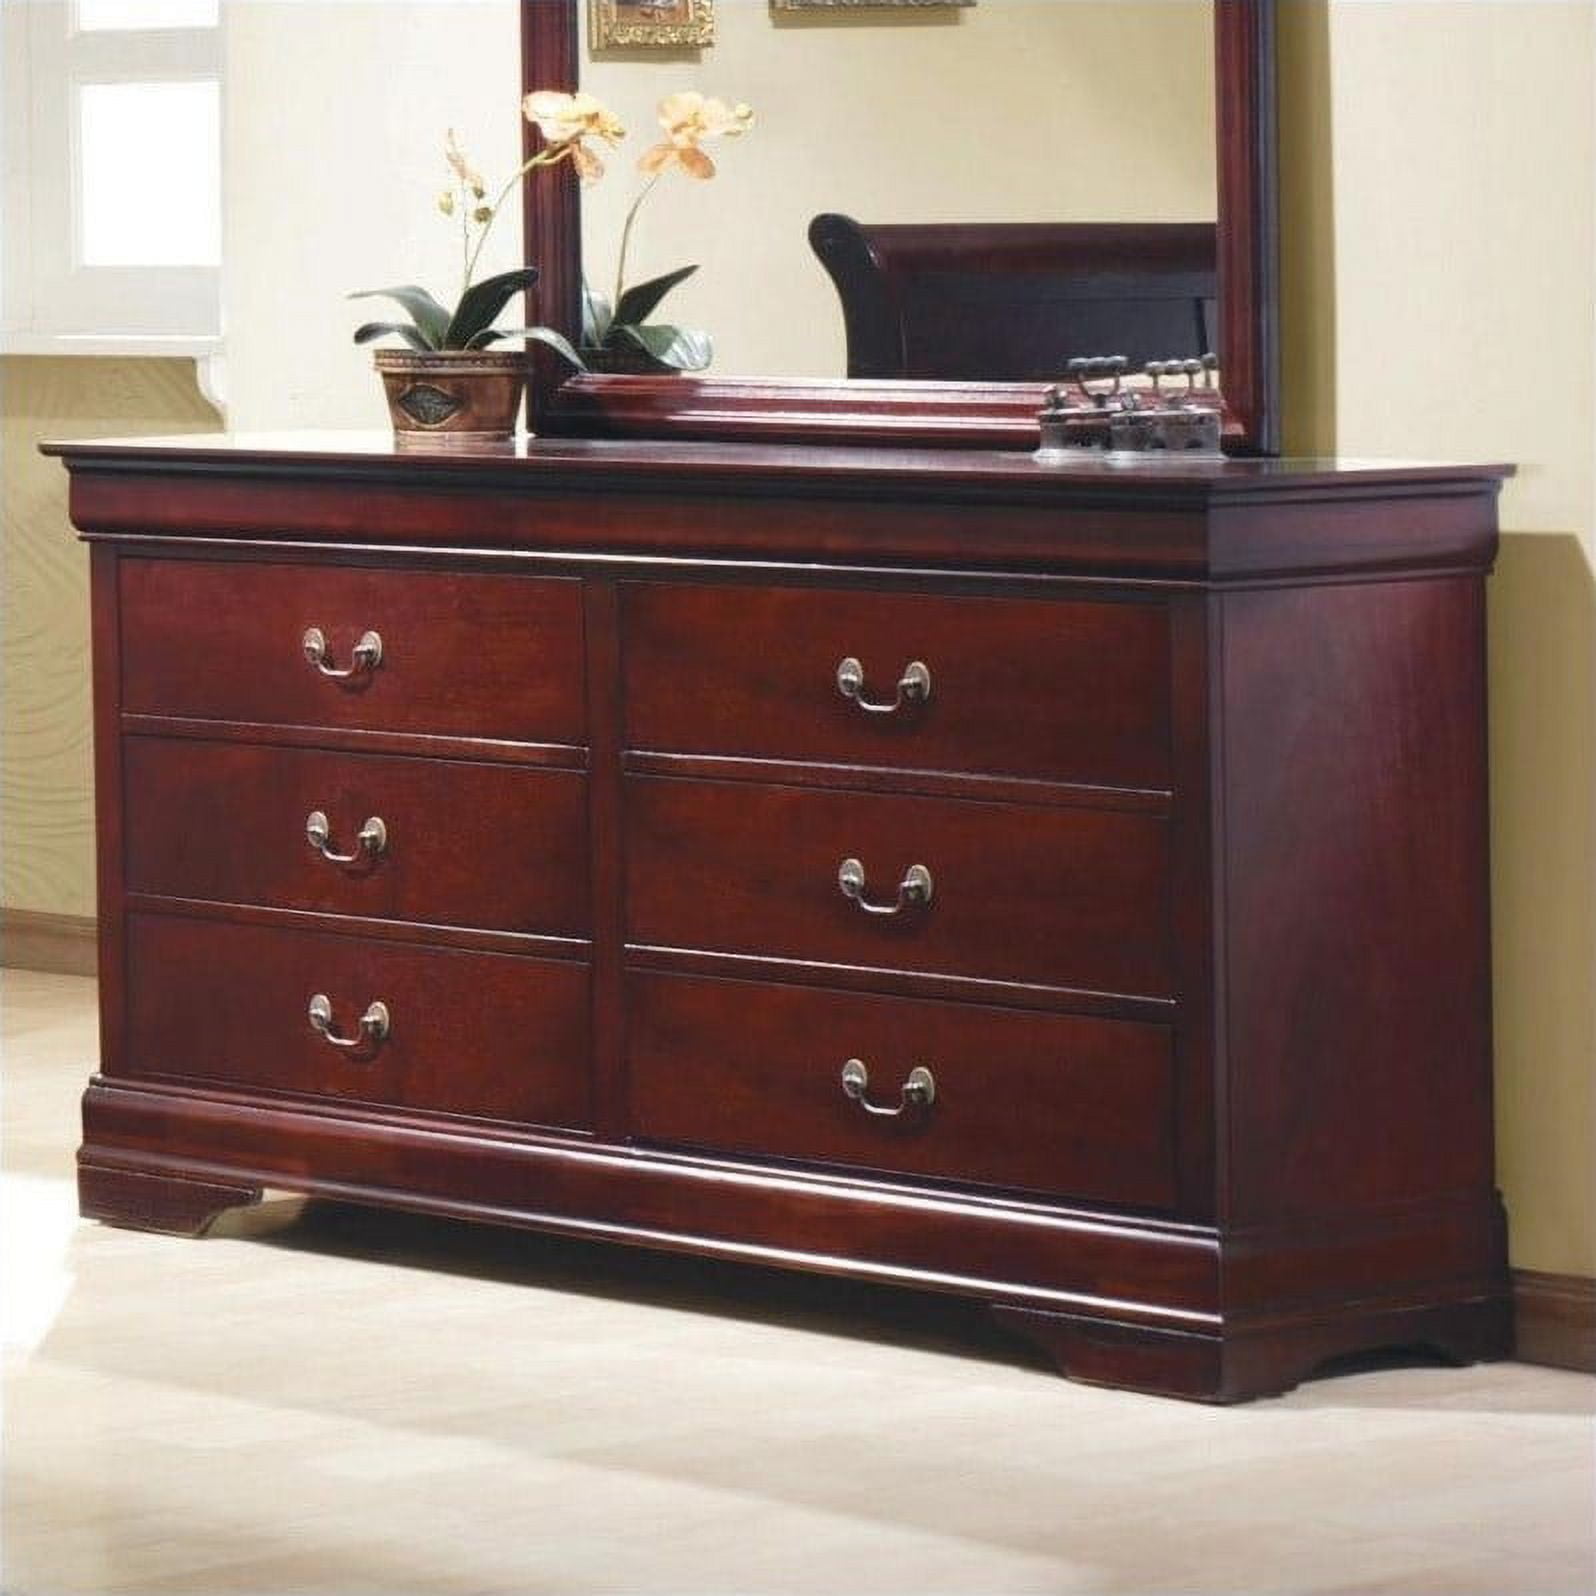  Coaster Home Furnishings Louis Philippe 5-Drawer Chest Red Brown  203975 : Home & Kitchen